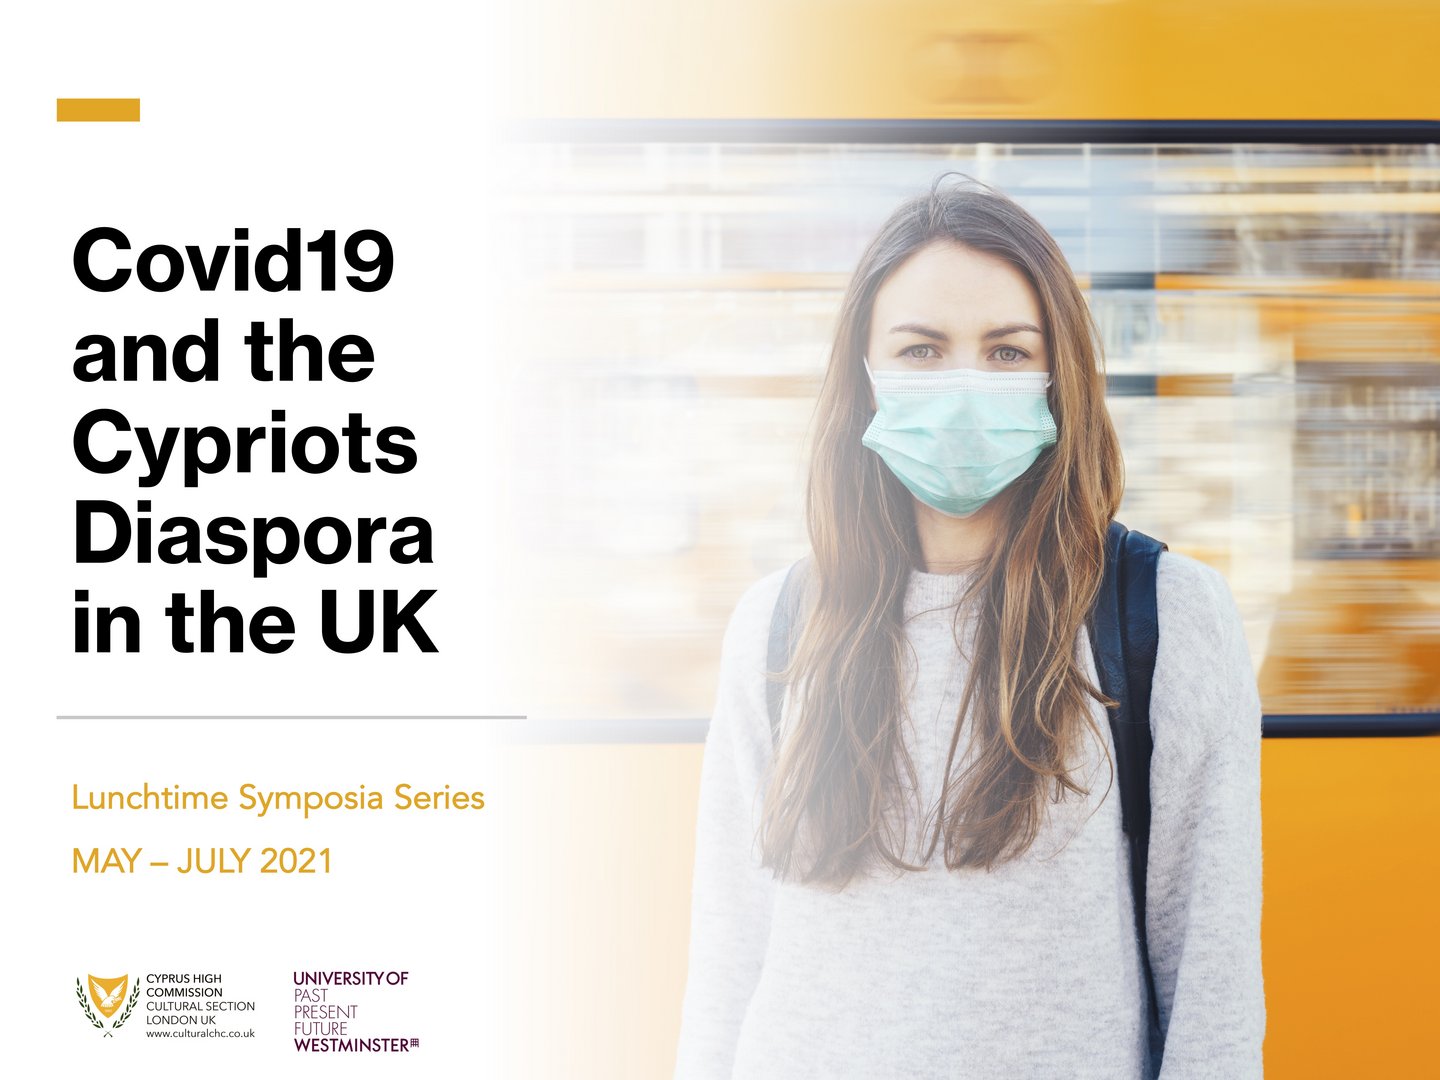 image Lunchtime Symposia Series: Covid-19 and the Cypriot Diaspora in the UK